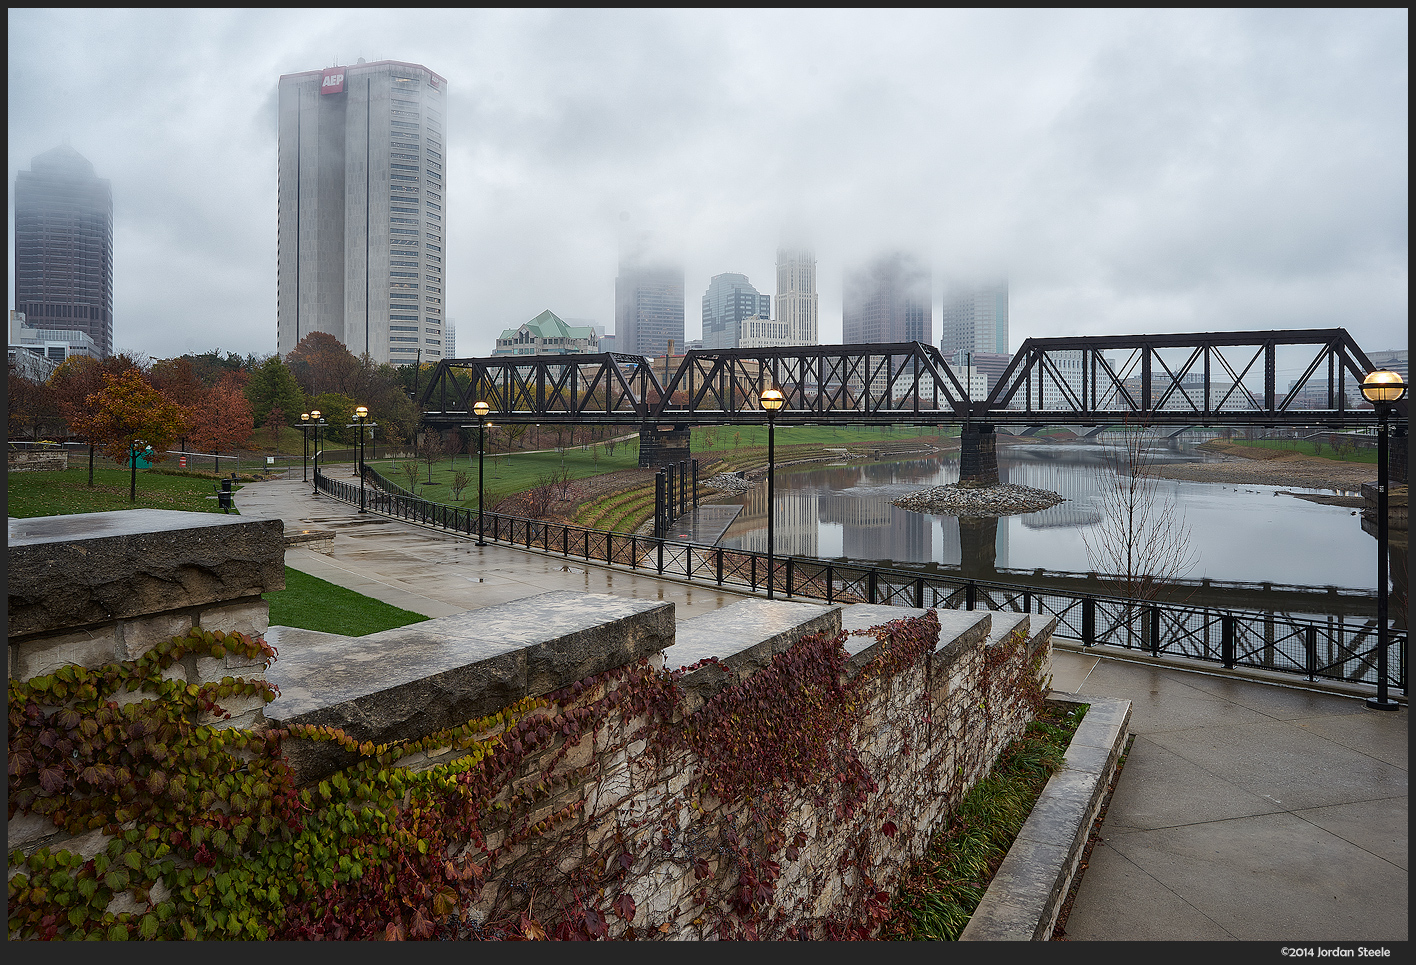 Columbus in the Mist - Sony A7 II with Zeiss Batis 25mm f/2 Distagon @ f/11